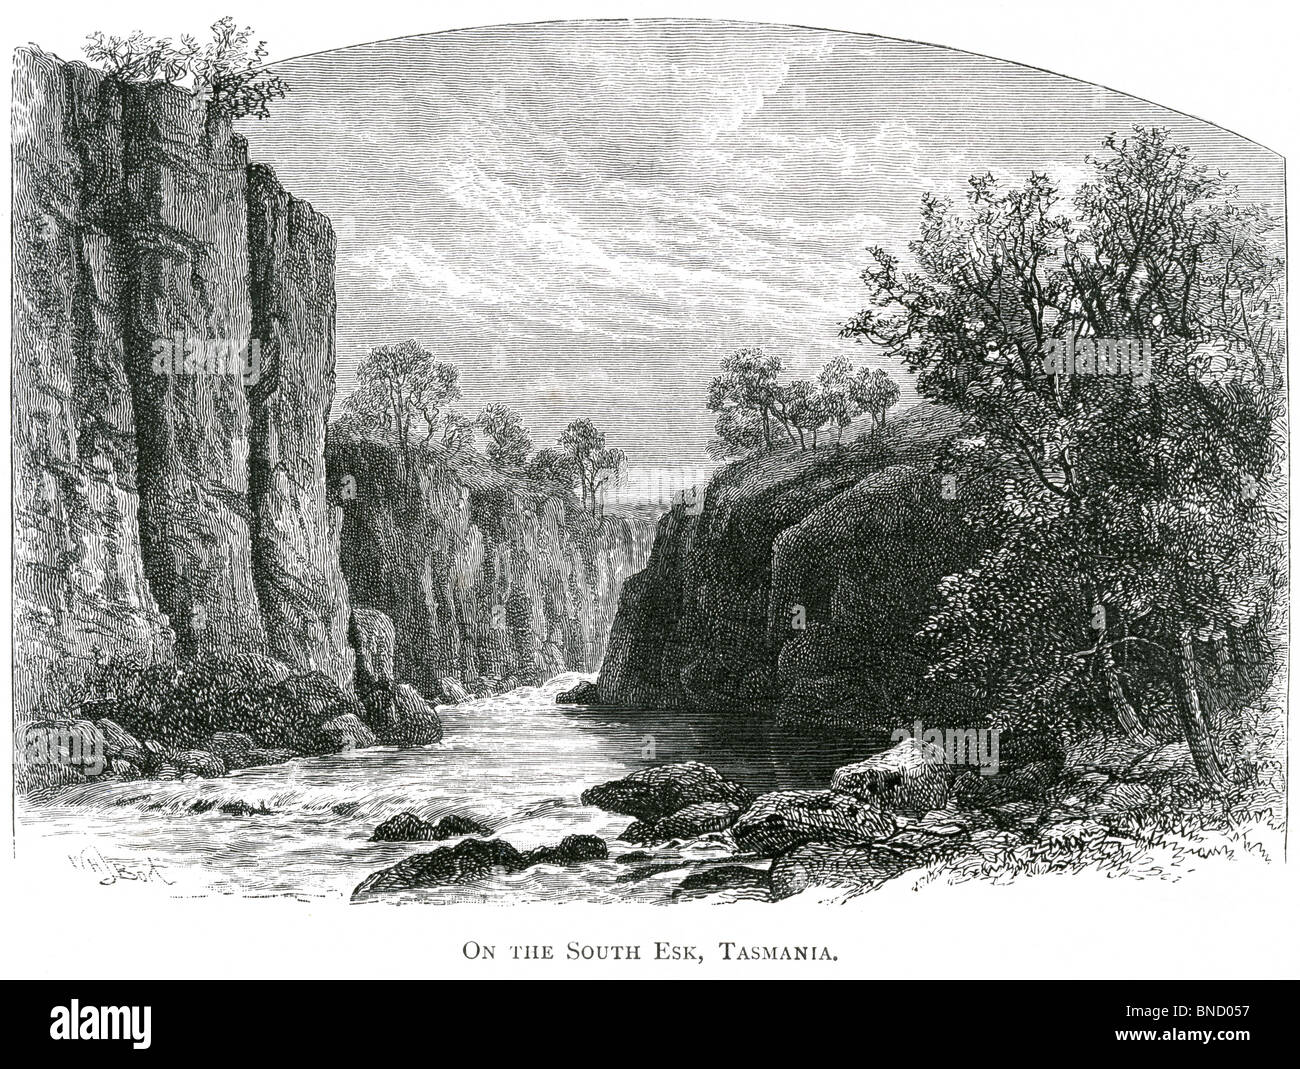 An engraving entitled 'On the South Esk, Tasmania' - published in a book about Australia printed in 1886. Stock Photo